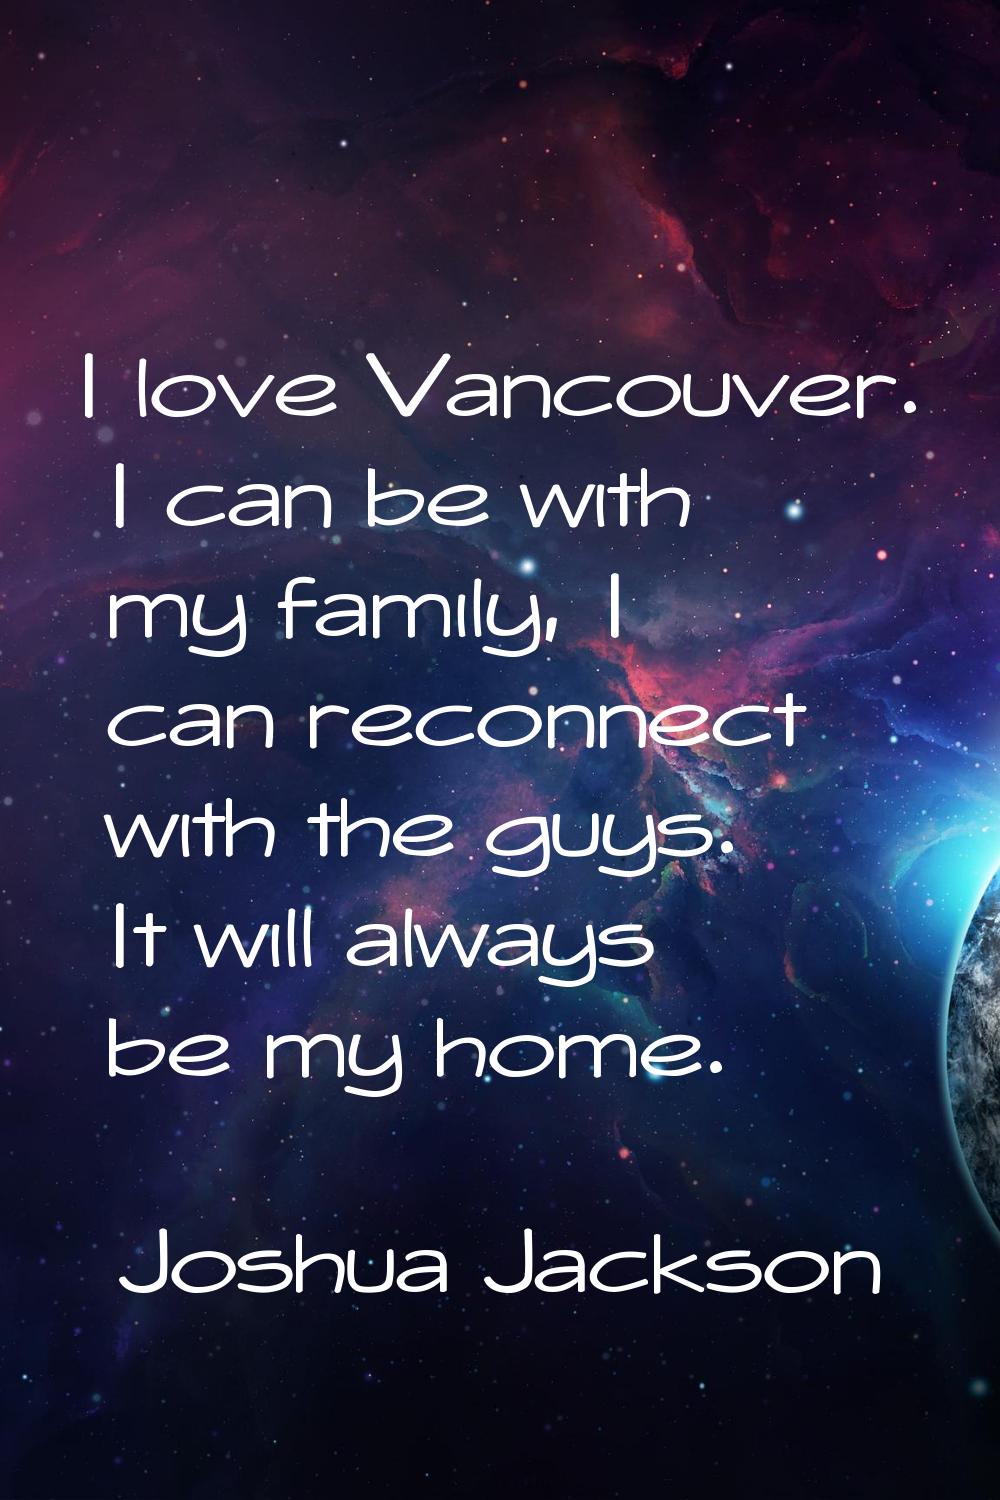 I love Vancouver. I can be with my family, I can reconnect with the guys. It will always be my home